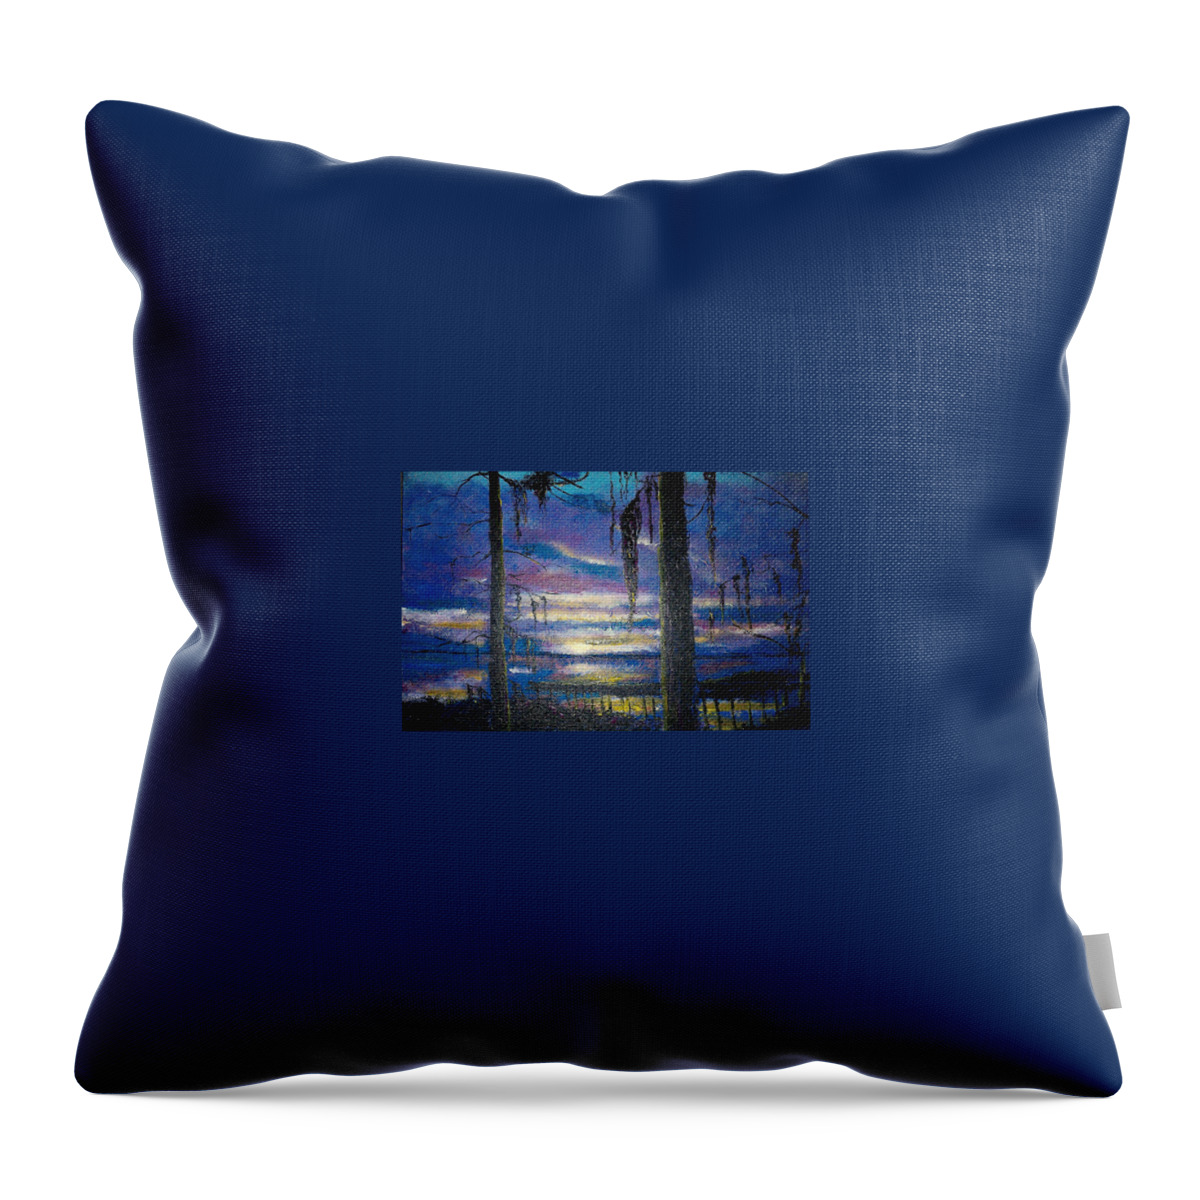 Lake Throw Pillow featuring the painting On The Shore Of Waccamaw by Stefan Duncan